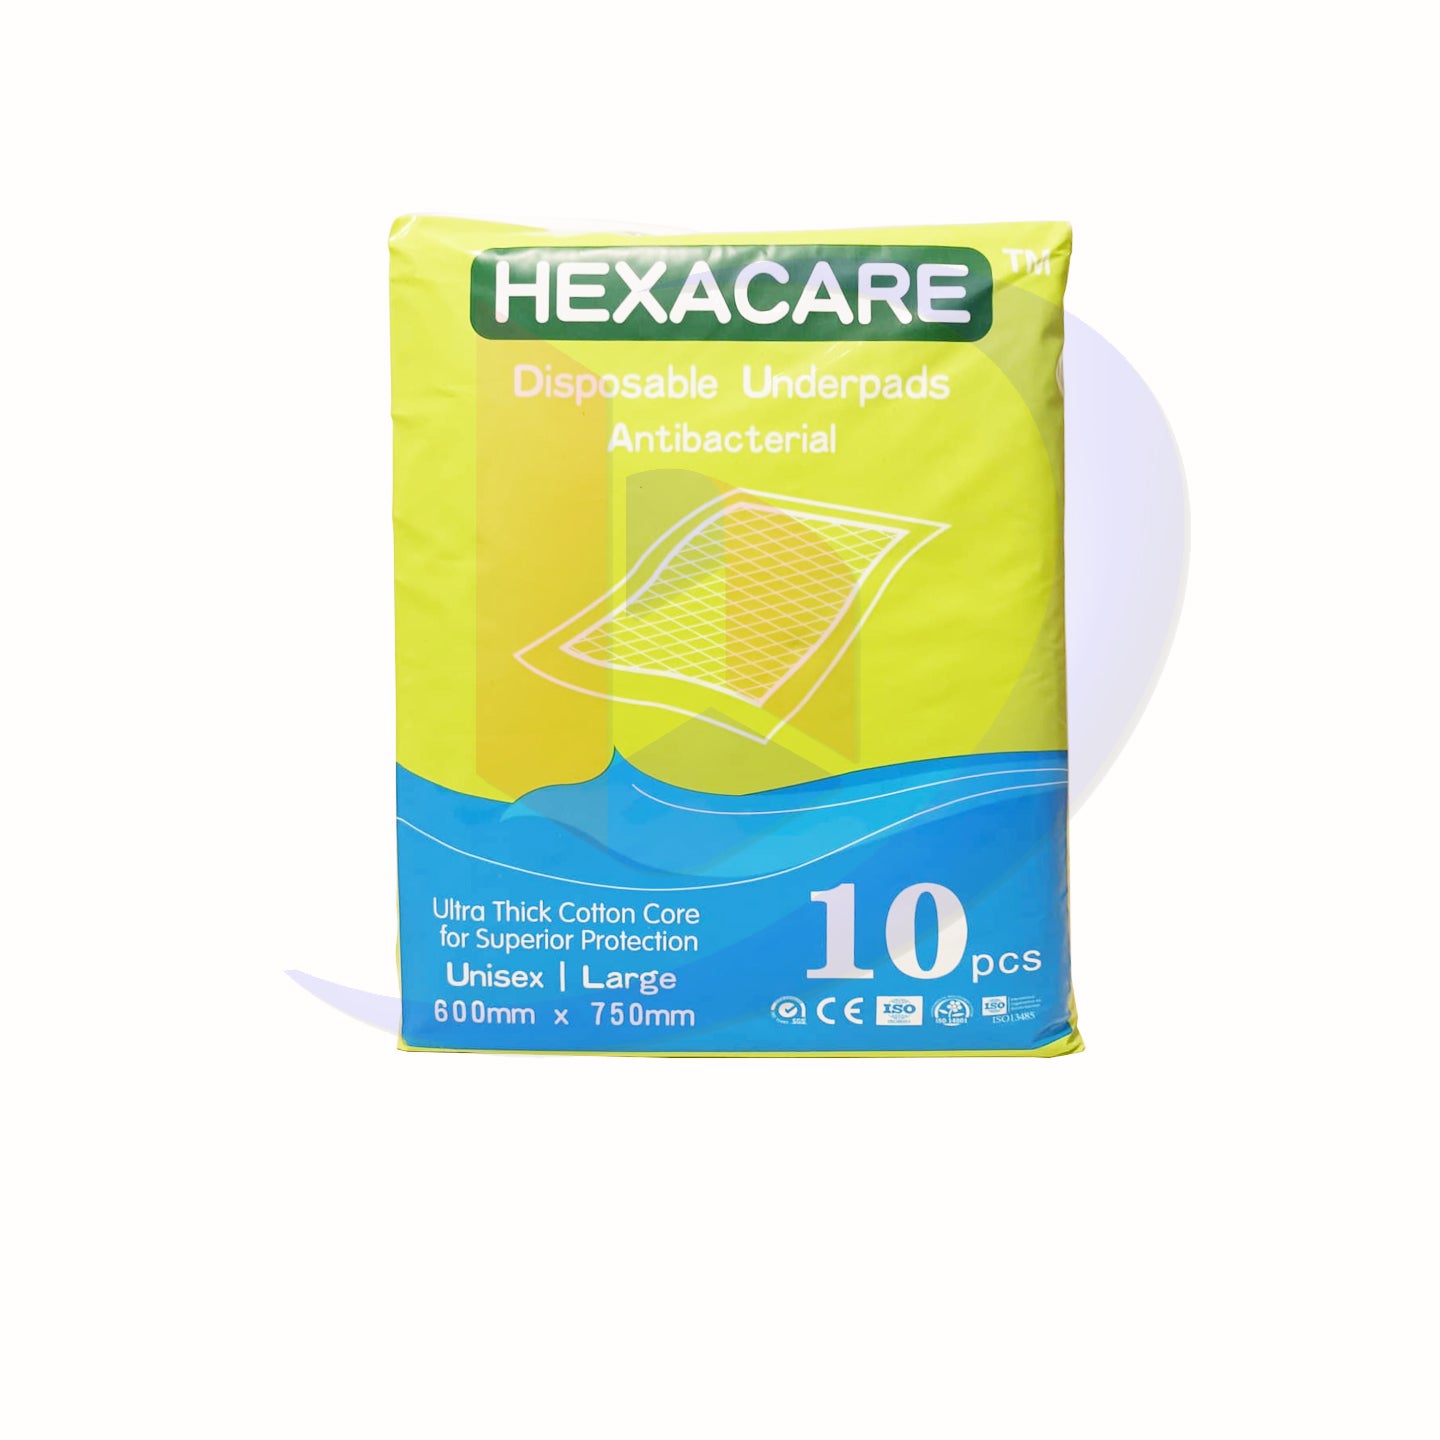 Disposable Underpads (Hexacare) Antibacterial Ultra Thick Cotton